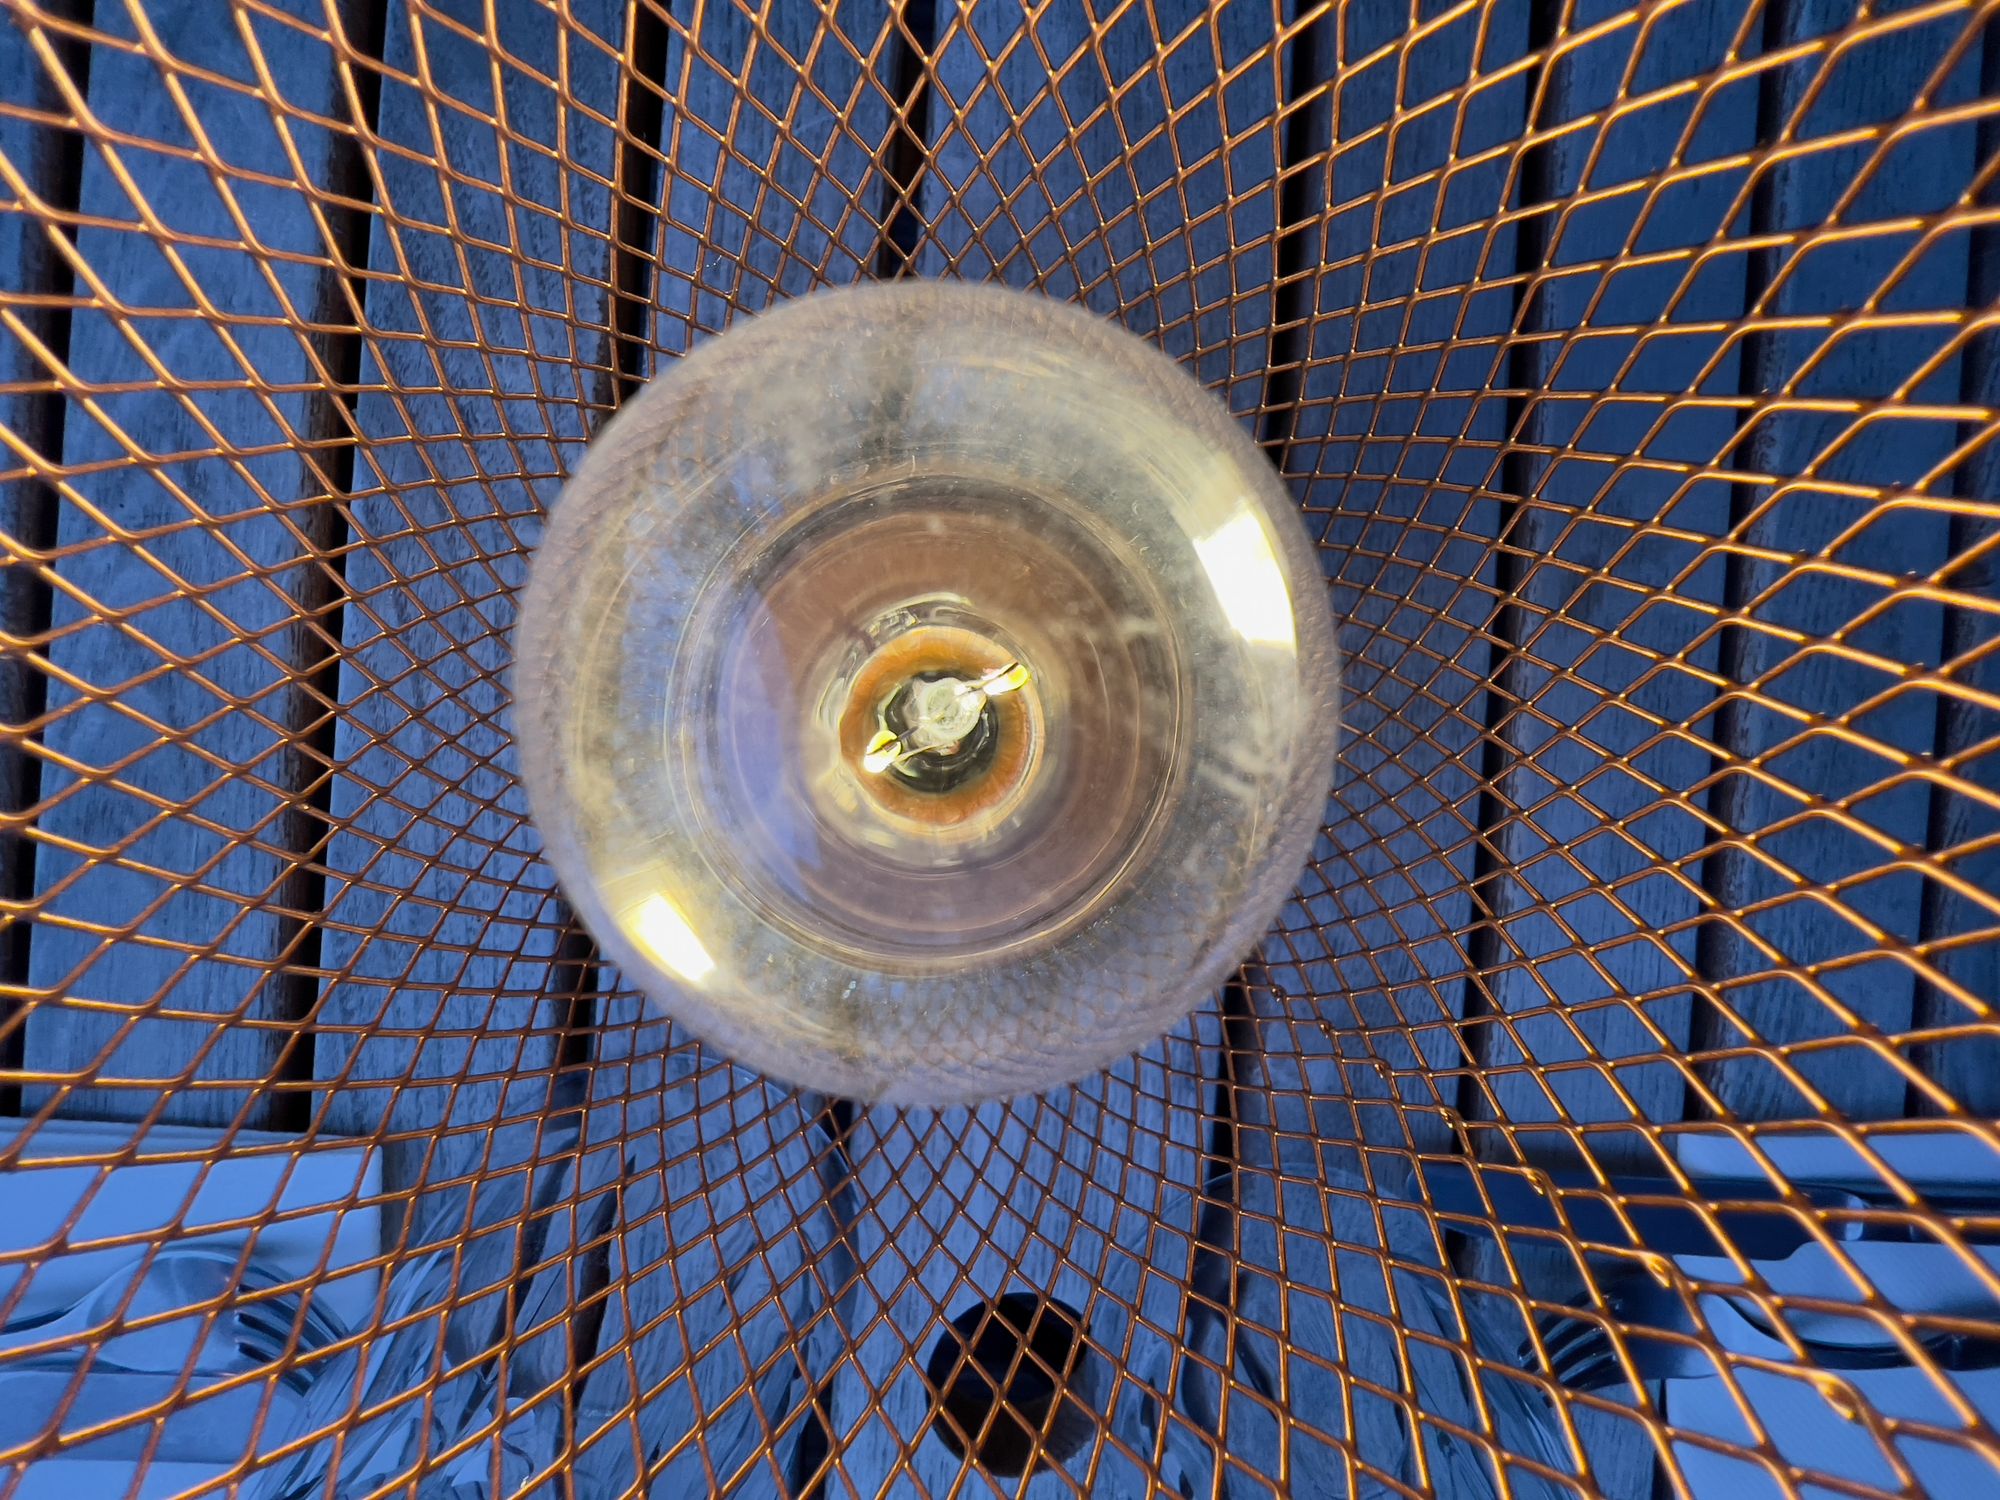 Detail of the top of a lit light bulb in a copper lattice lantern on a wooden table.